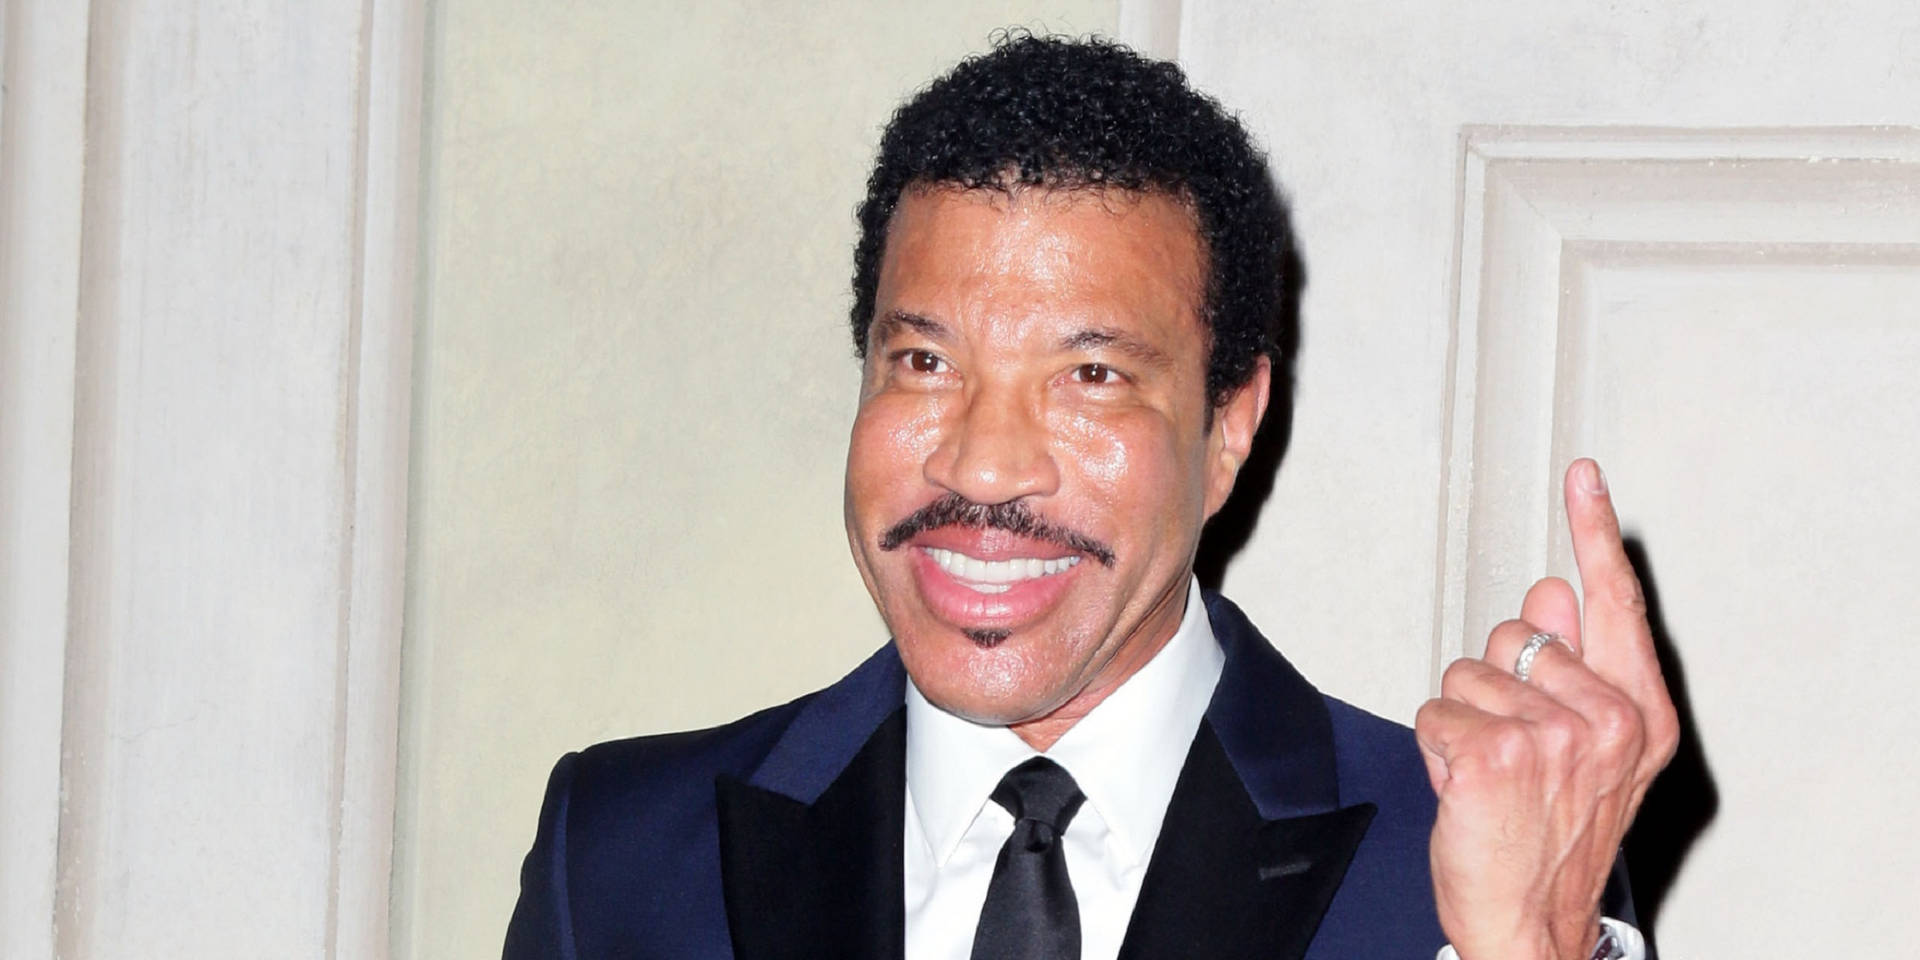 Lionel Richie Iconic Singer And Songwriter Wallpaper